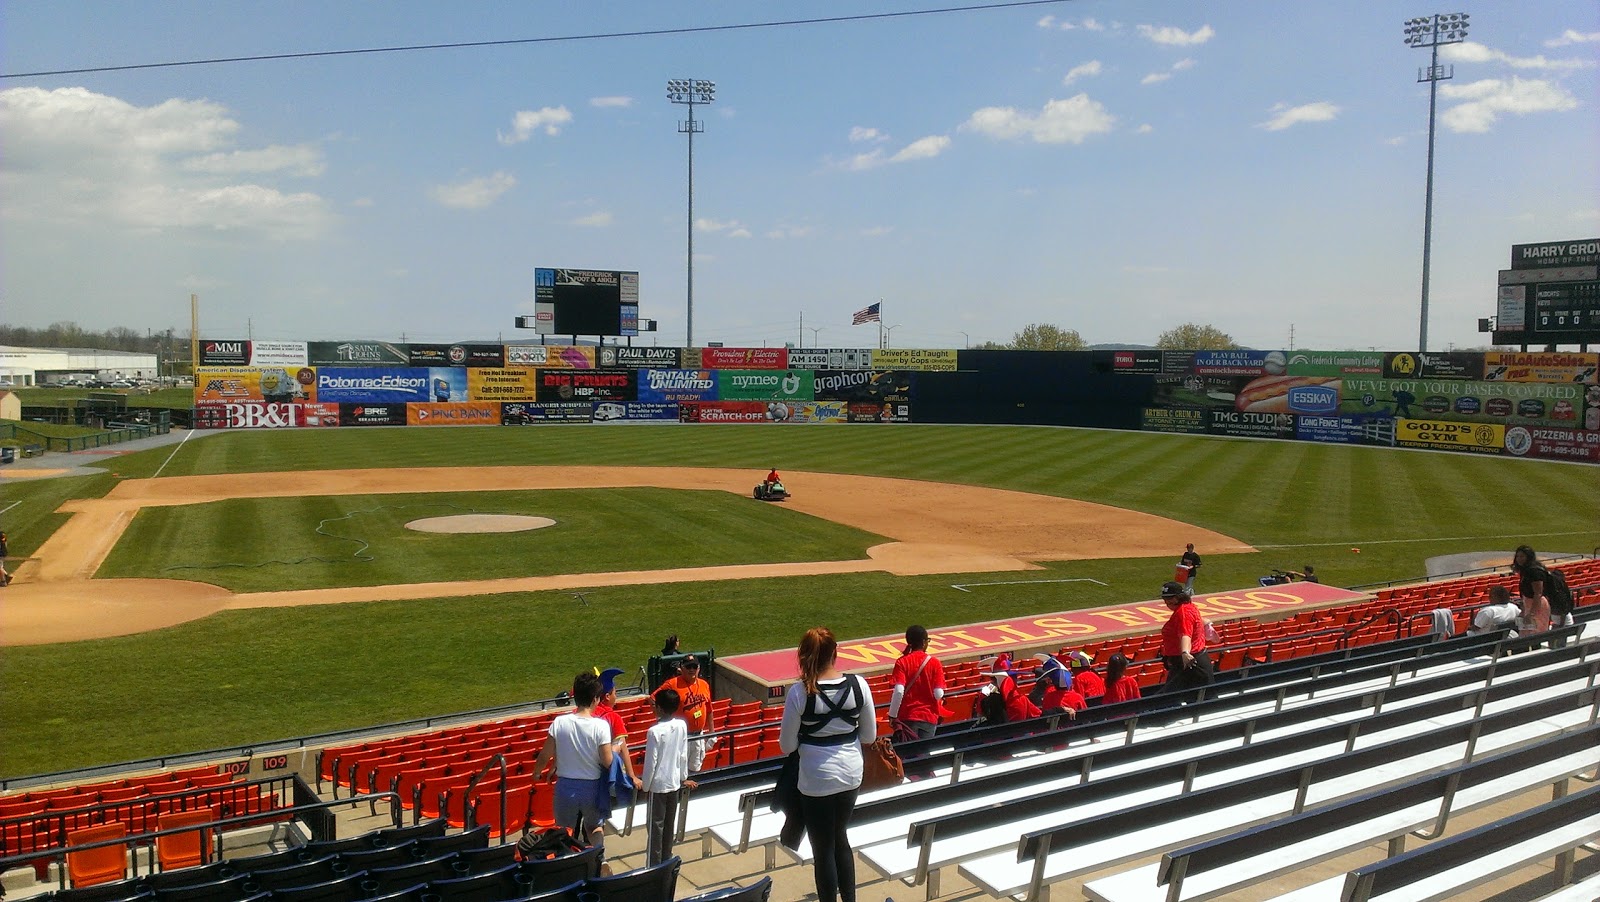 High-A Frederick Keys' Single-Game Ticket Prices, Season Tickets and